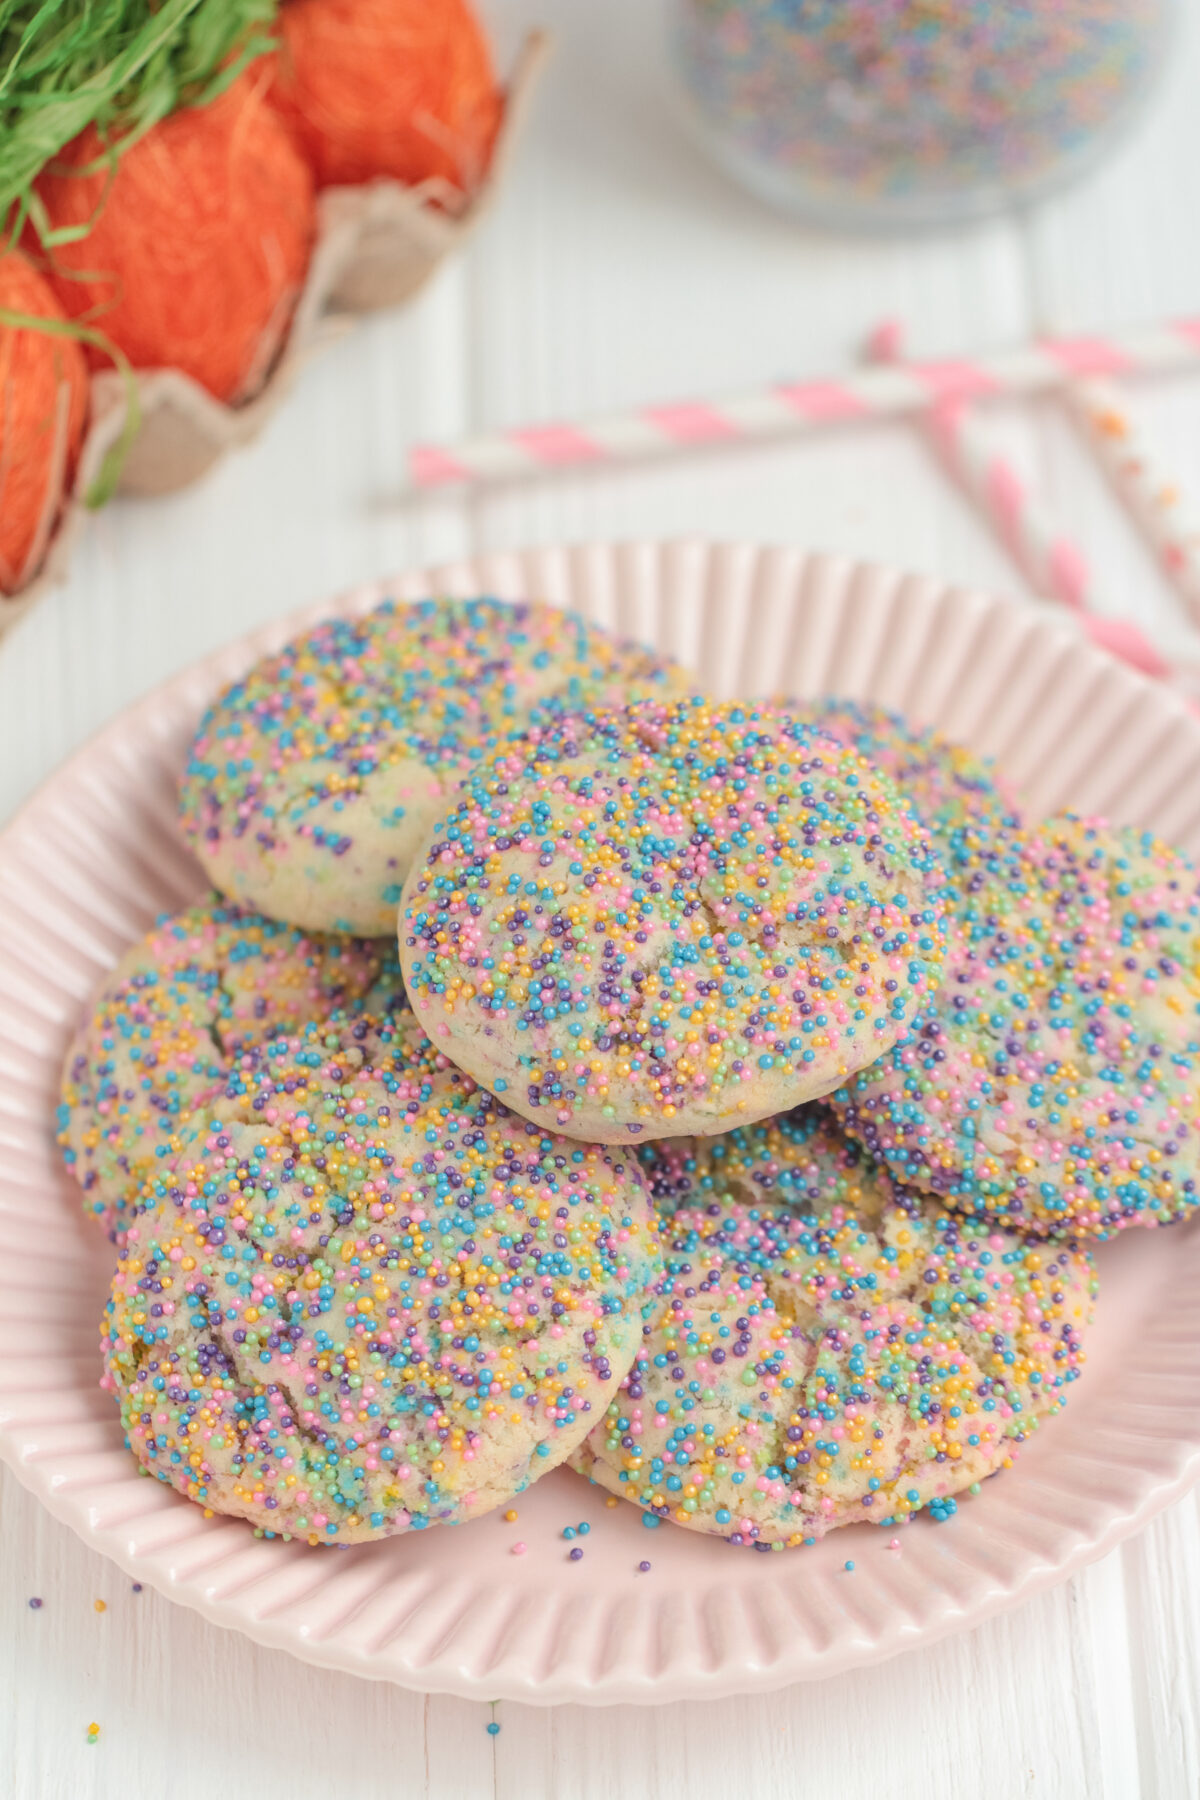 Love sugar cookies? This Easter sprinkle sugar cookies recipe is perfect for you! These cookies are easy to make and taste delicious.